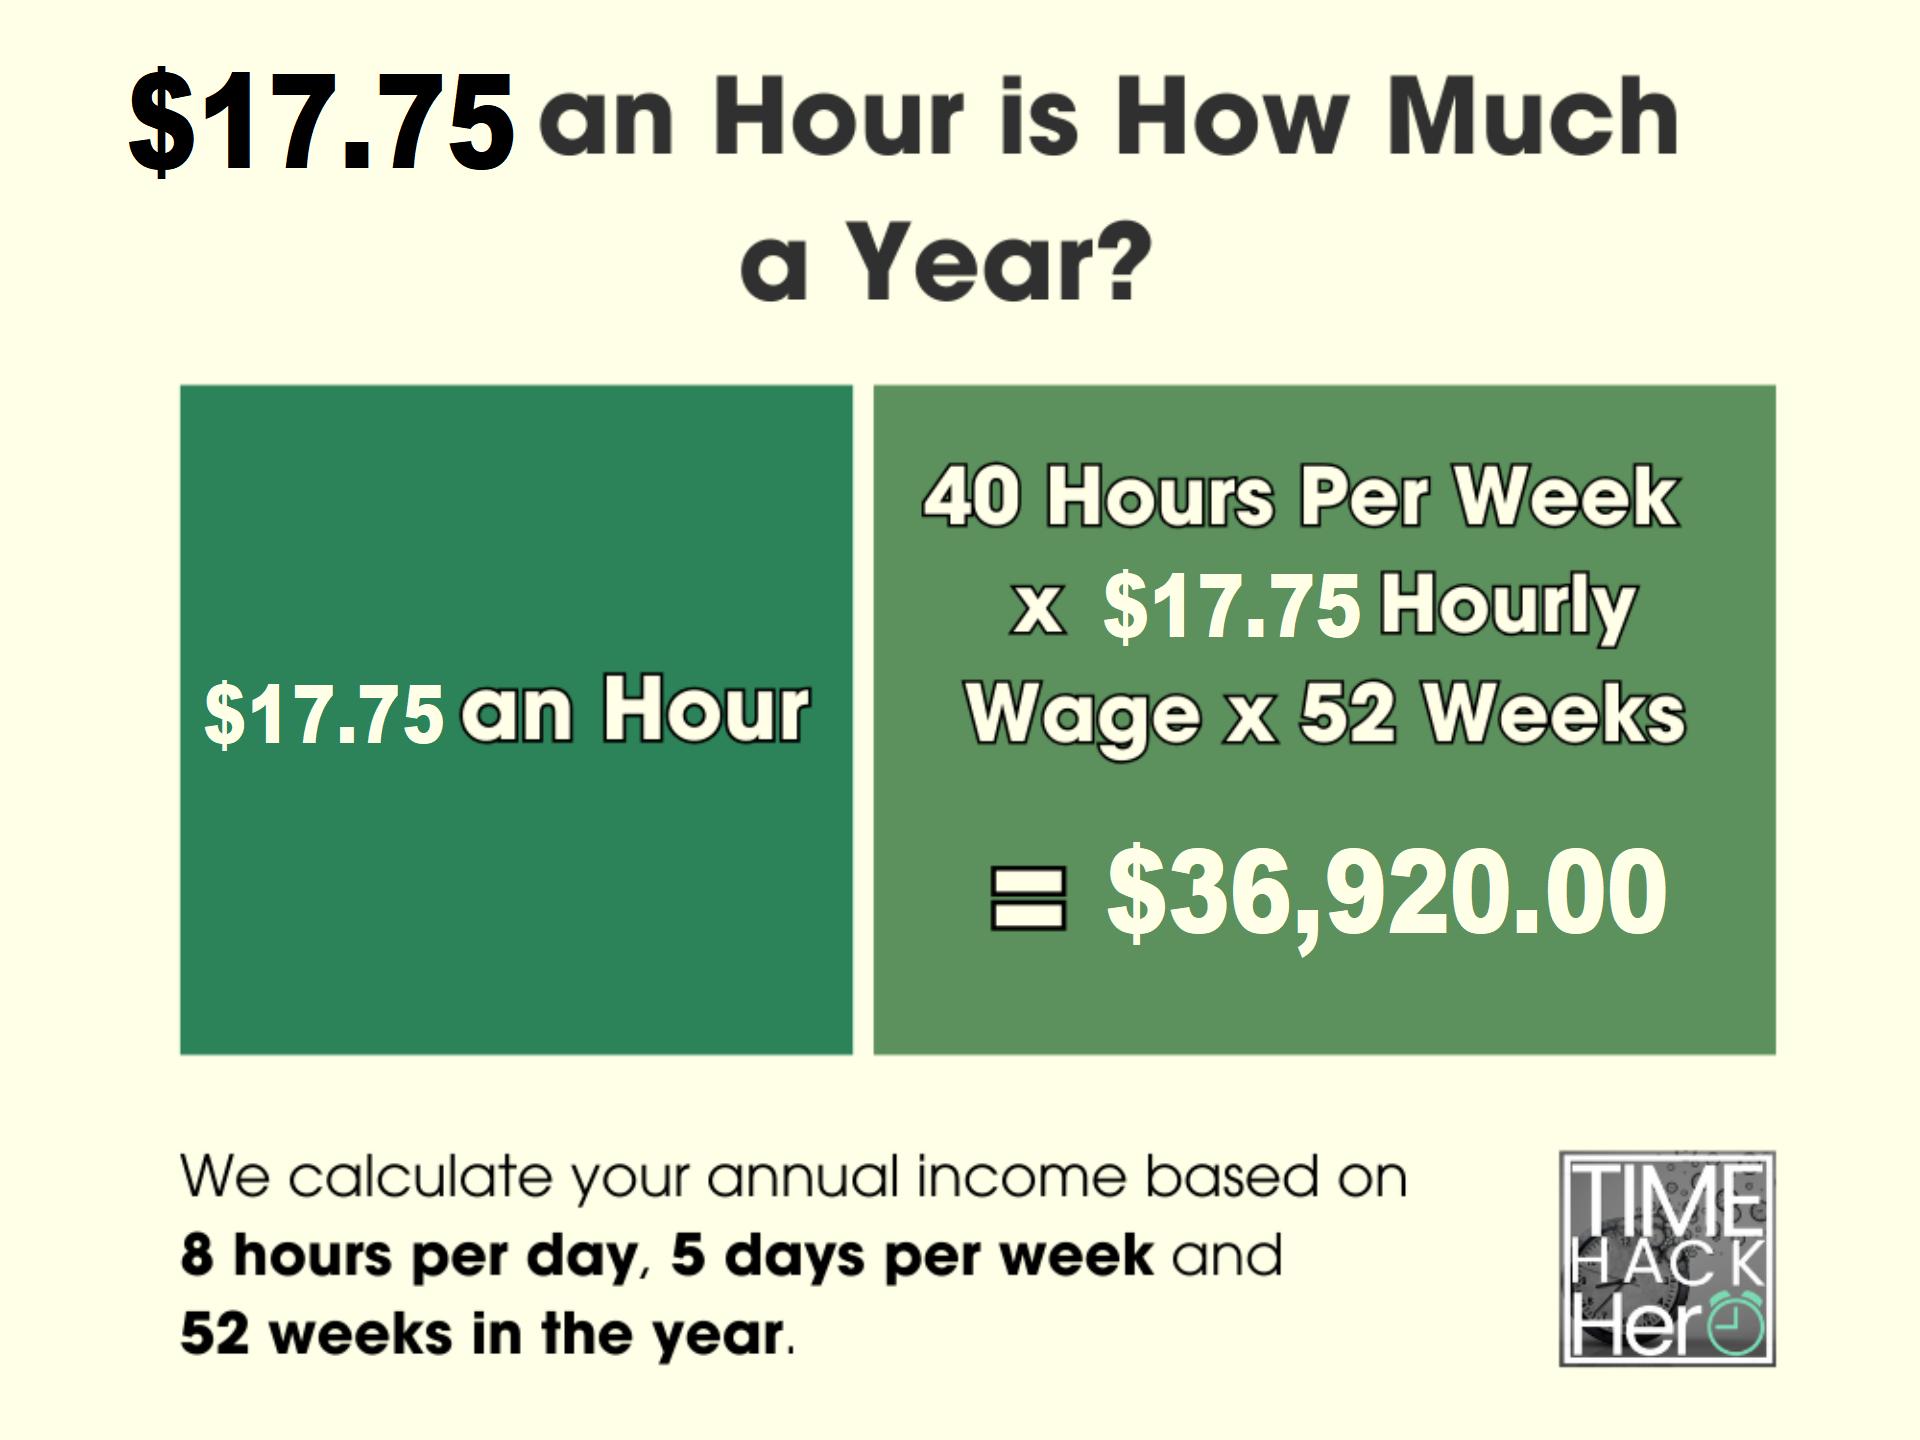 $17.75 an Hour is How Much a Year